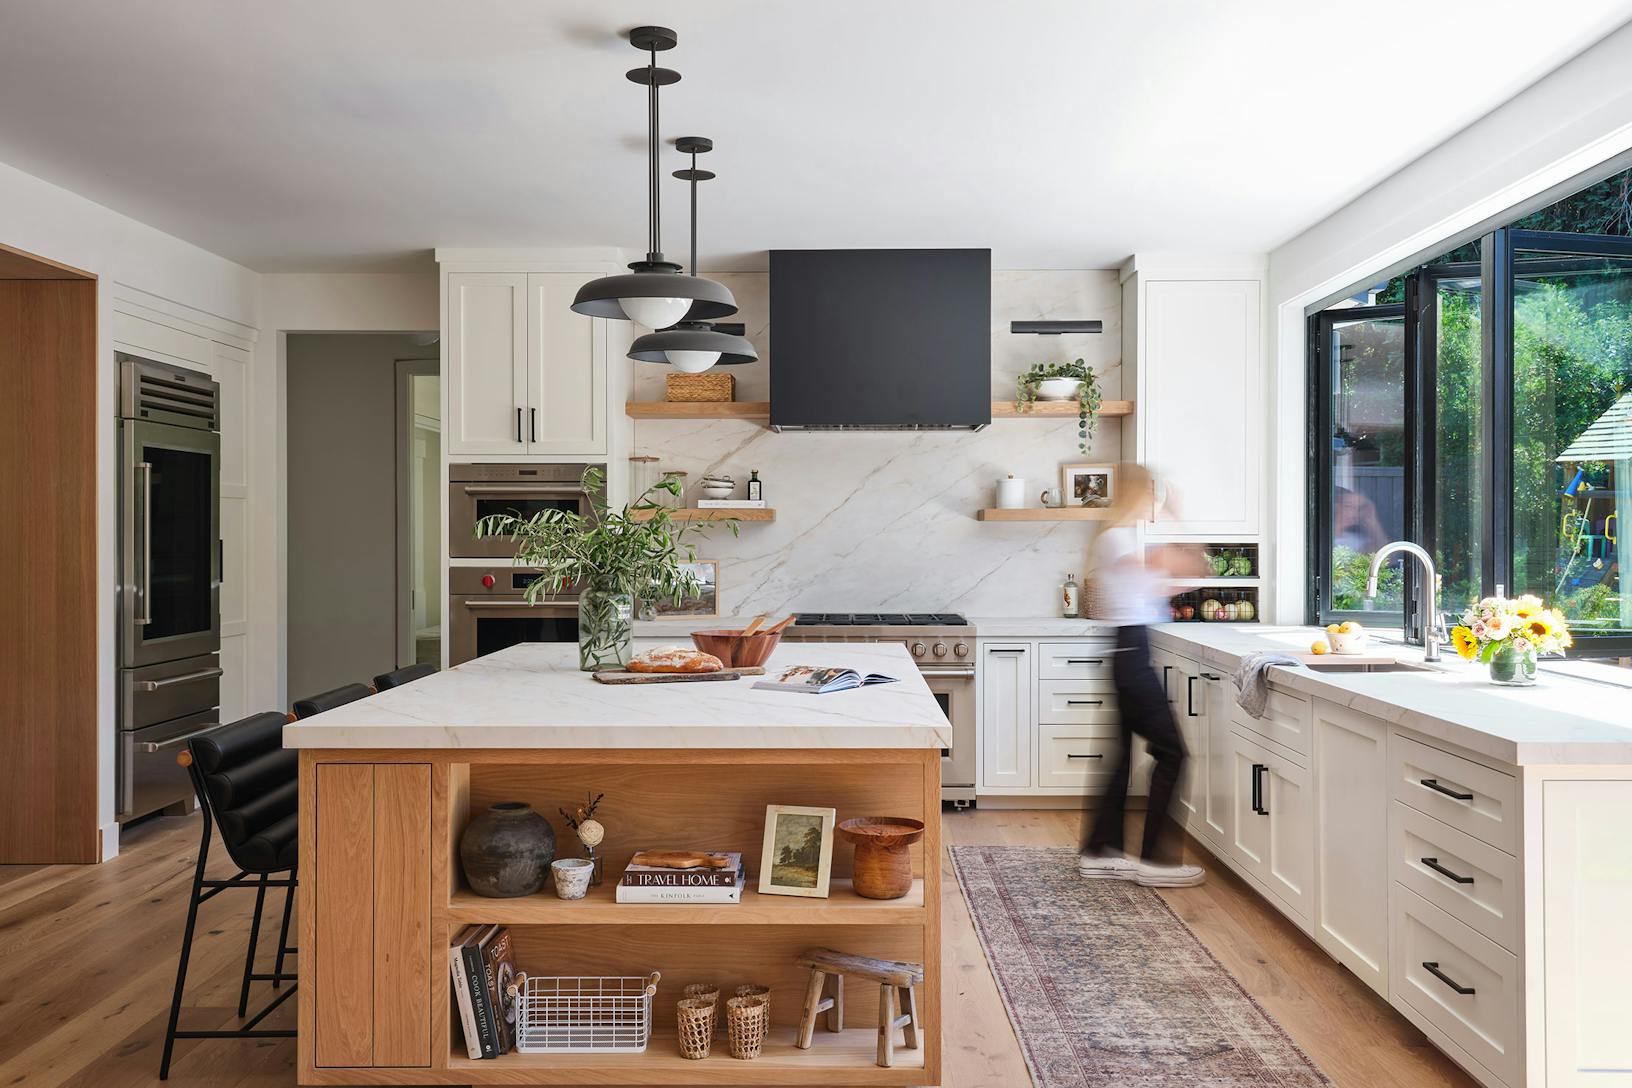 A modern kitchen with a center island, and a window/door combination designed for indoor outdoor open space